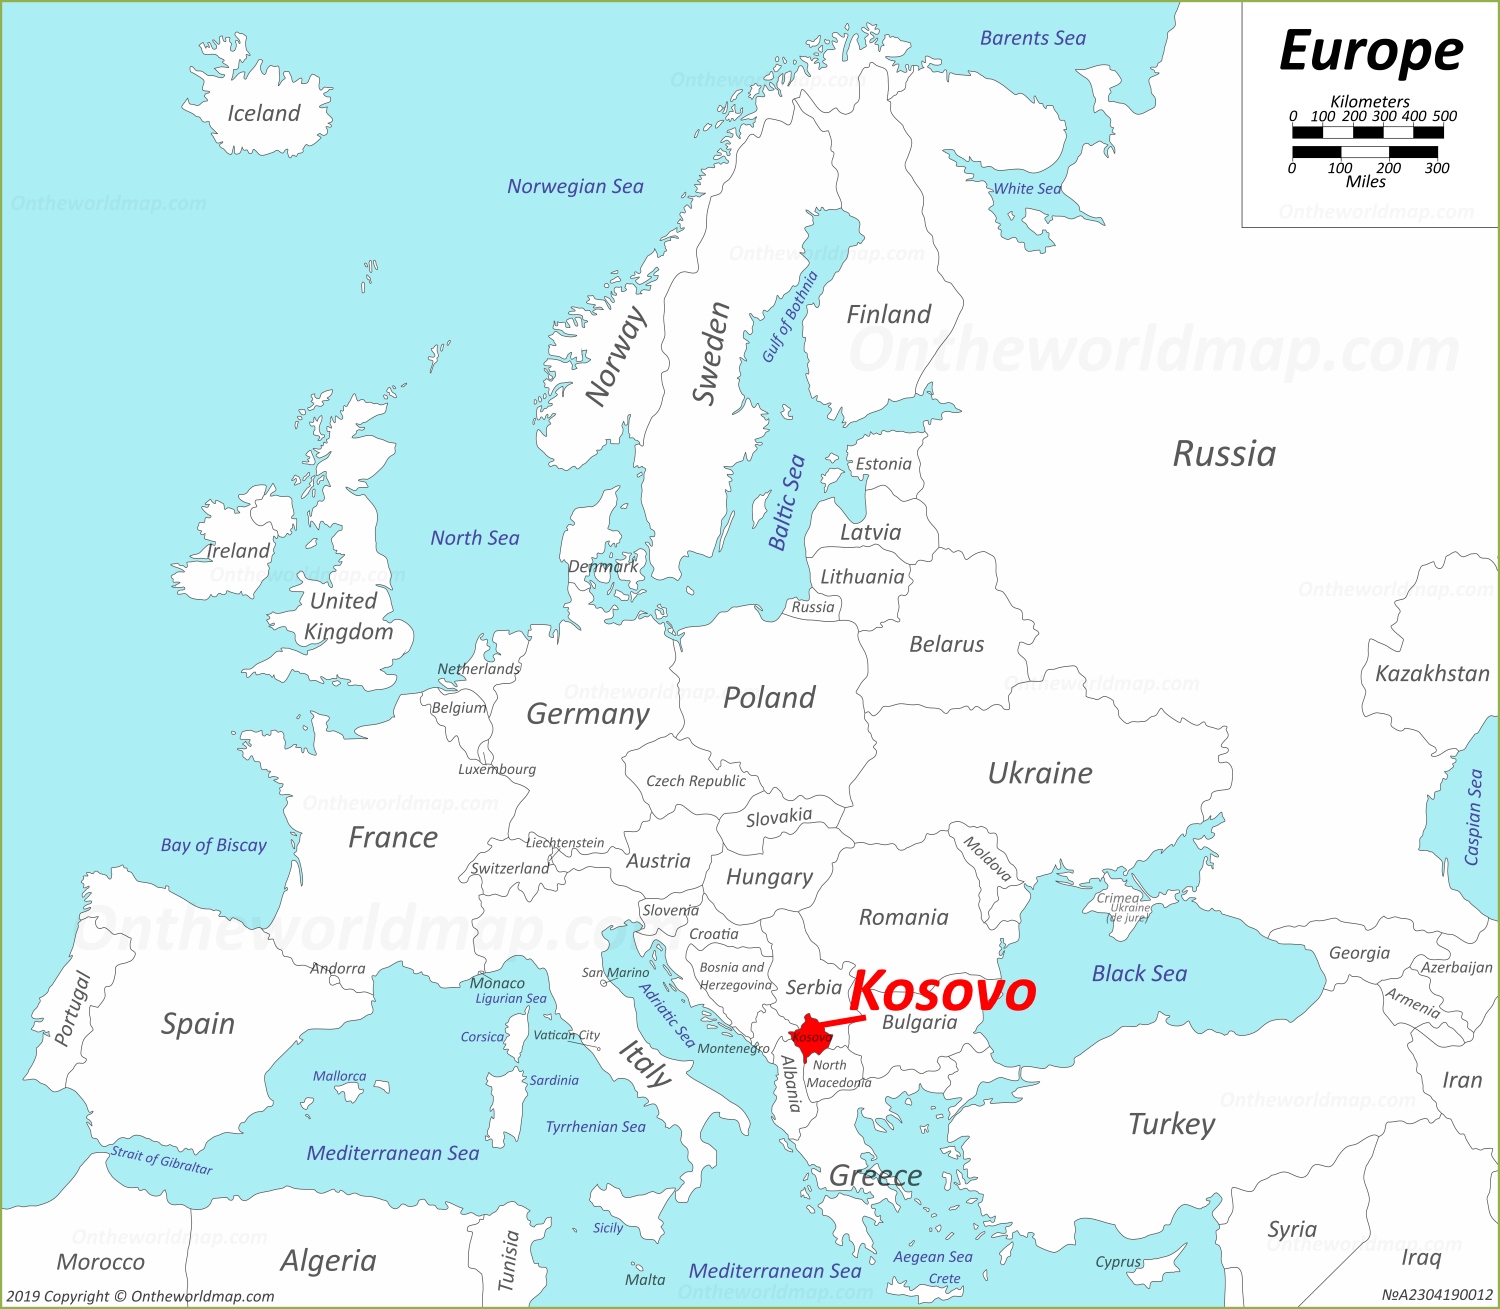 Kosovo Location On The Europe Map 